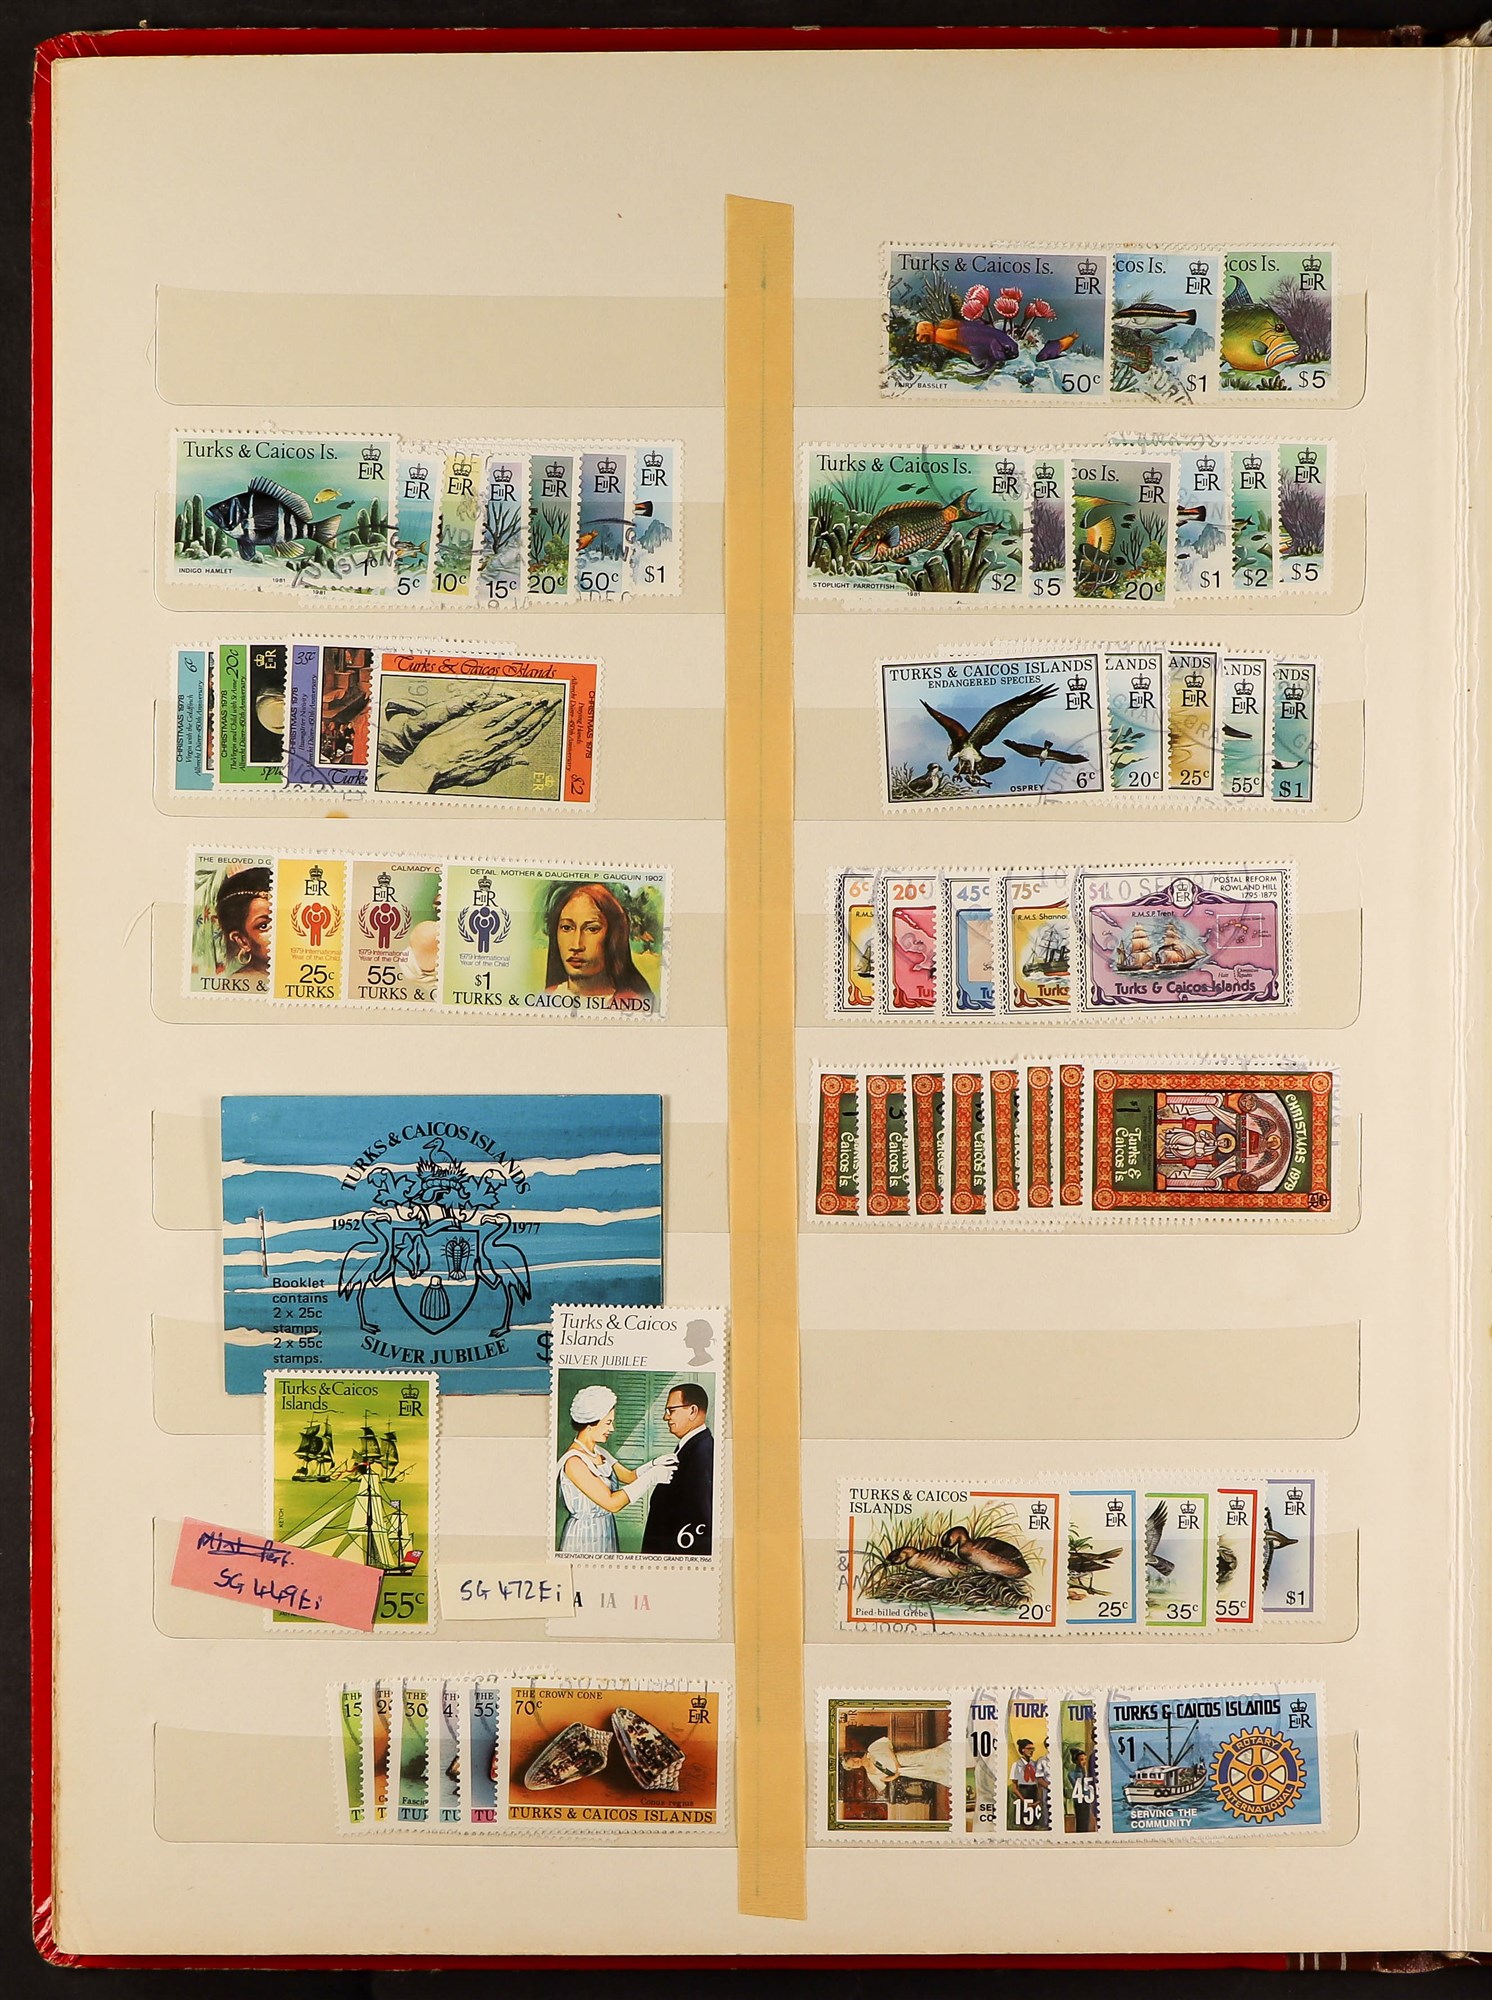 TURKS & CAICOS IS. 1881 - 1983 STAMPS mint / never hinged mint & used assortment on stock book - Image 4 of 6